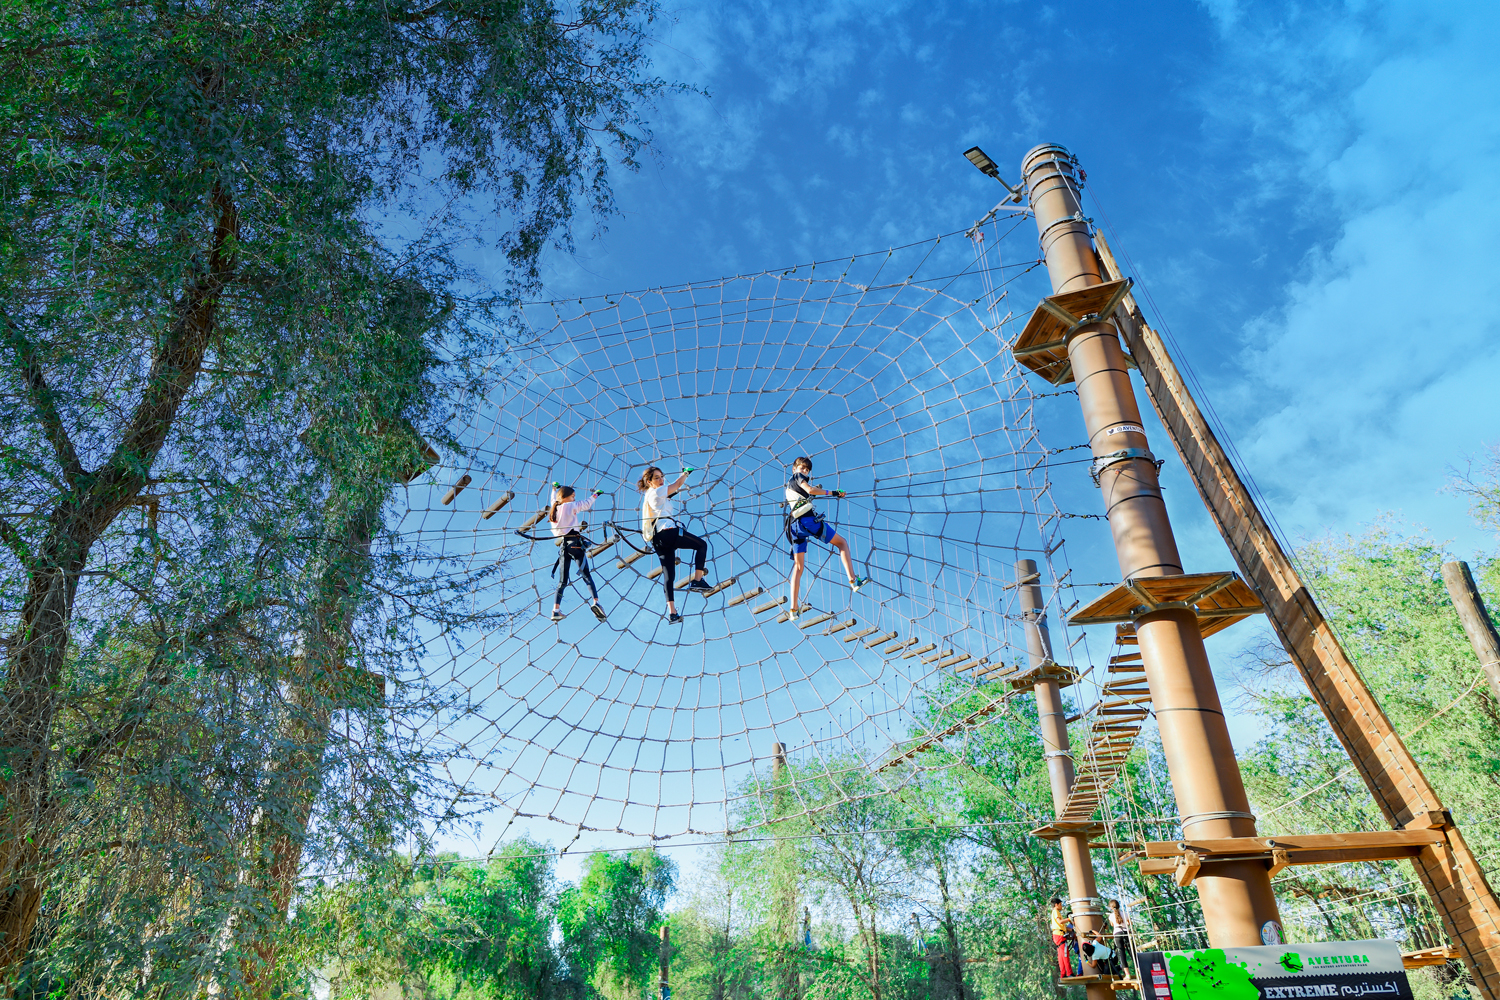 Dubai kids can sign up to a spring camp at Aventura Parks | Time Out Dubai